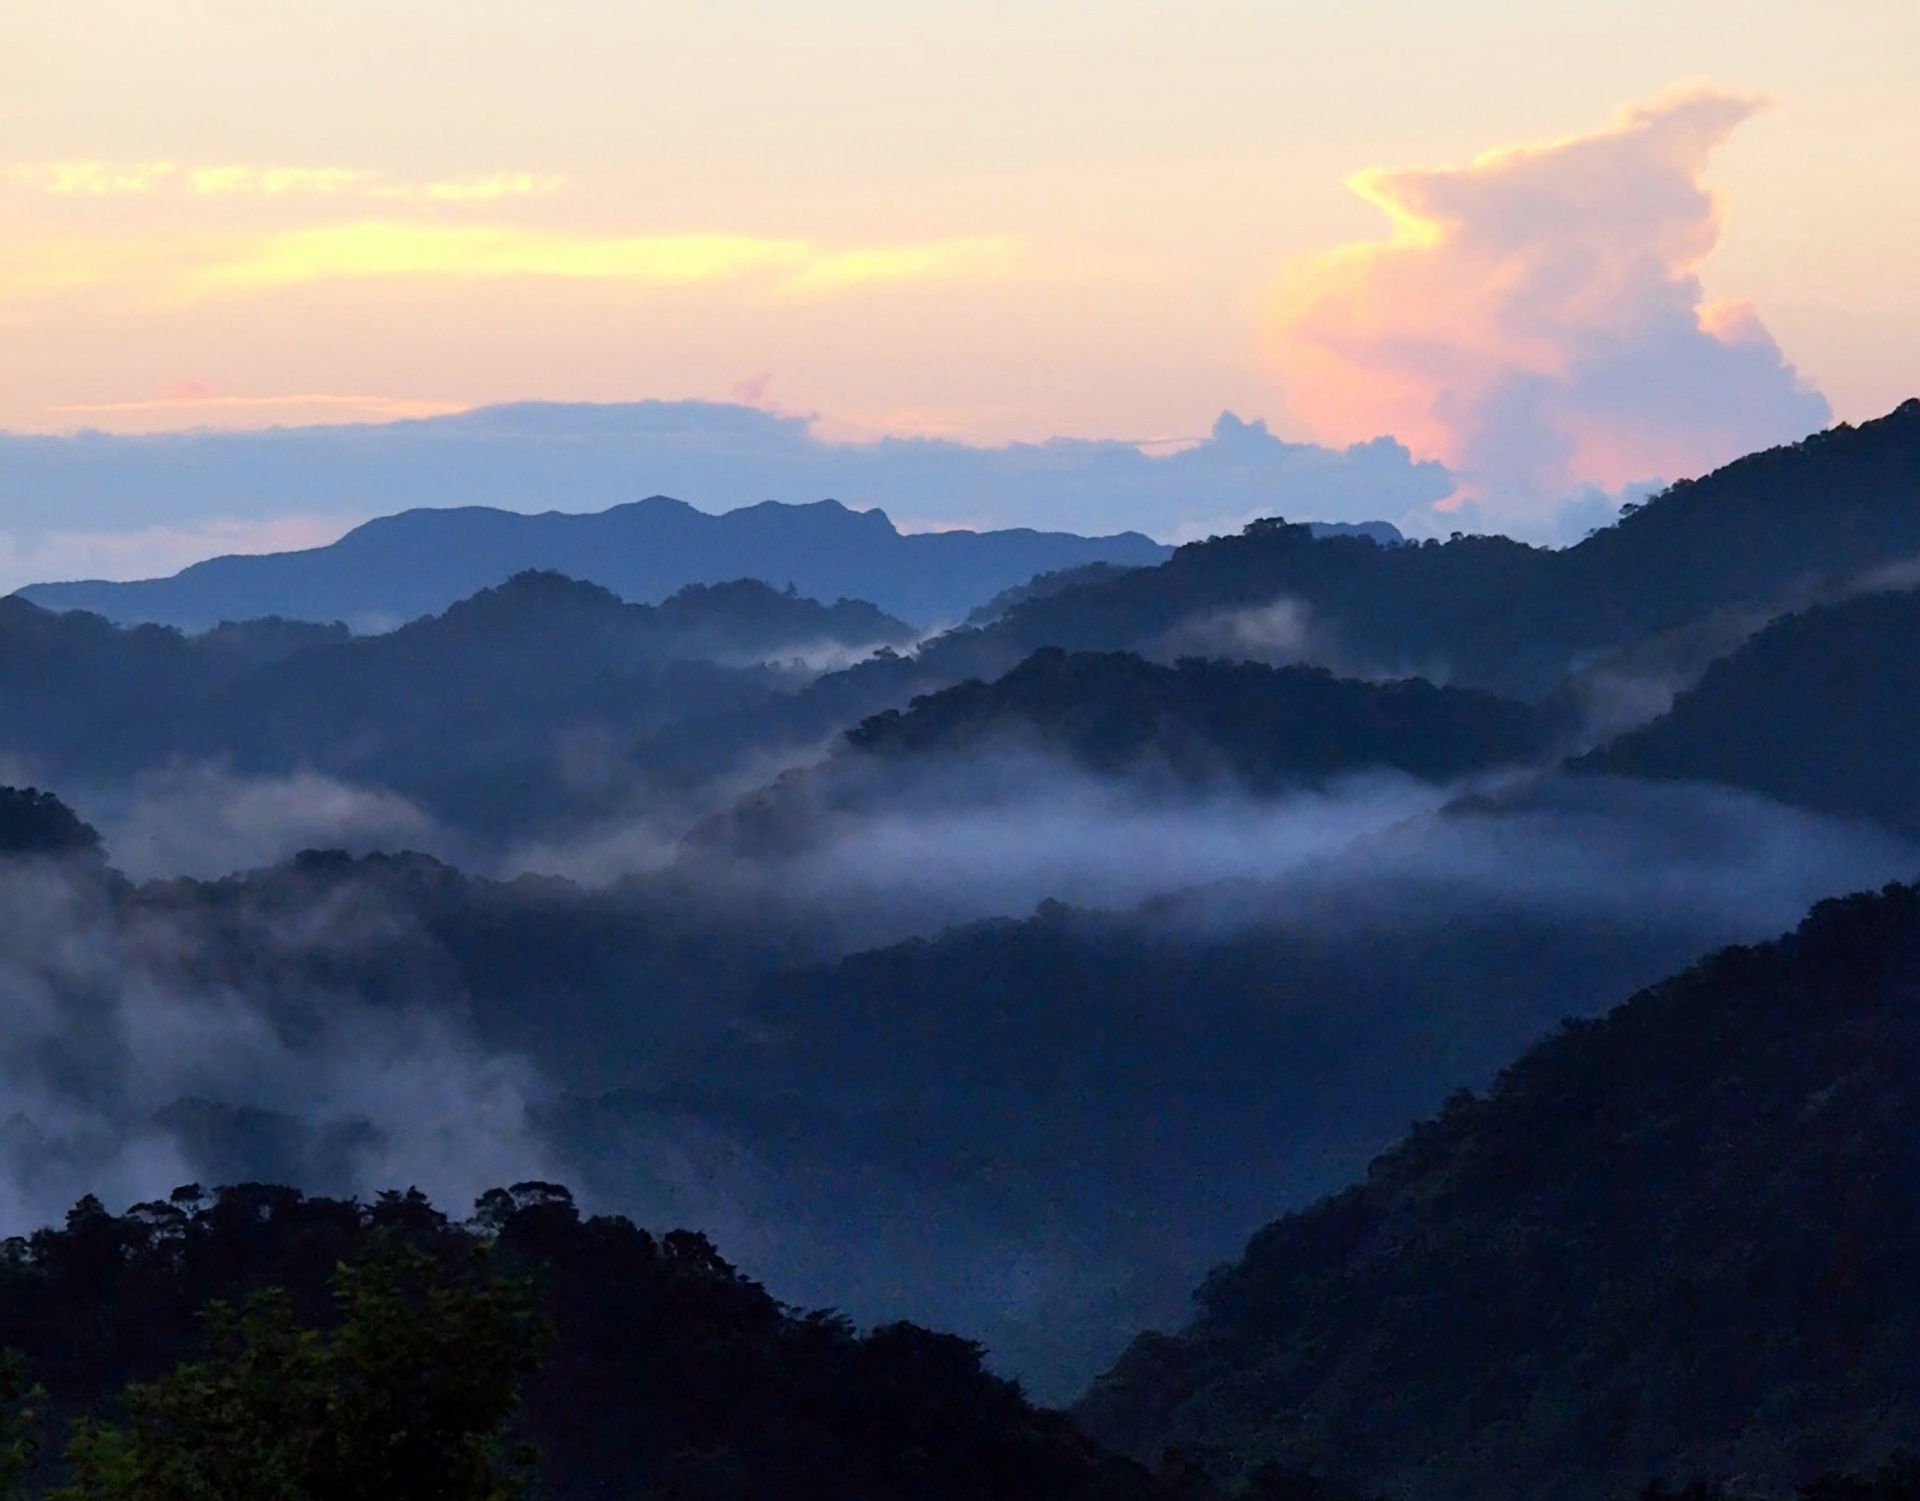 Morning mist in the valleys between Ruifang and Shuangxi, northeast Taiwan